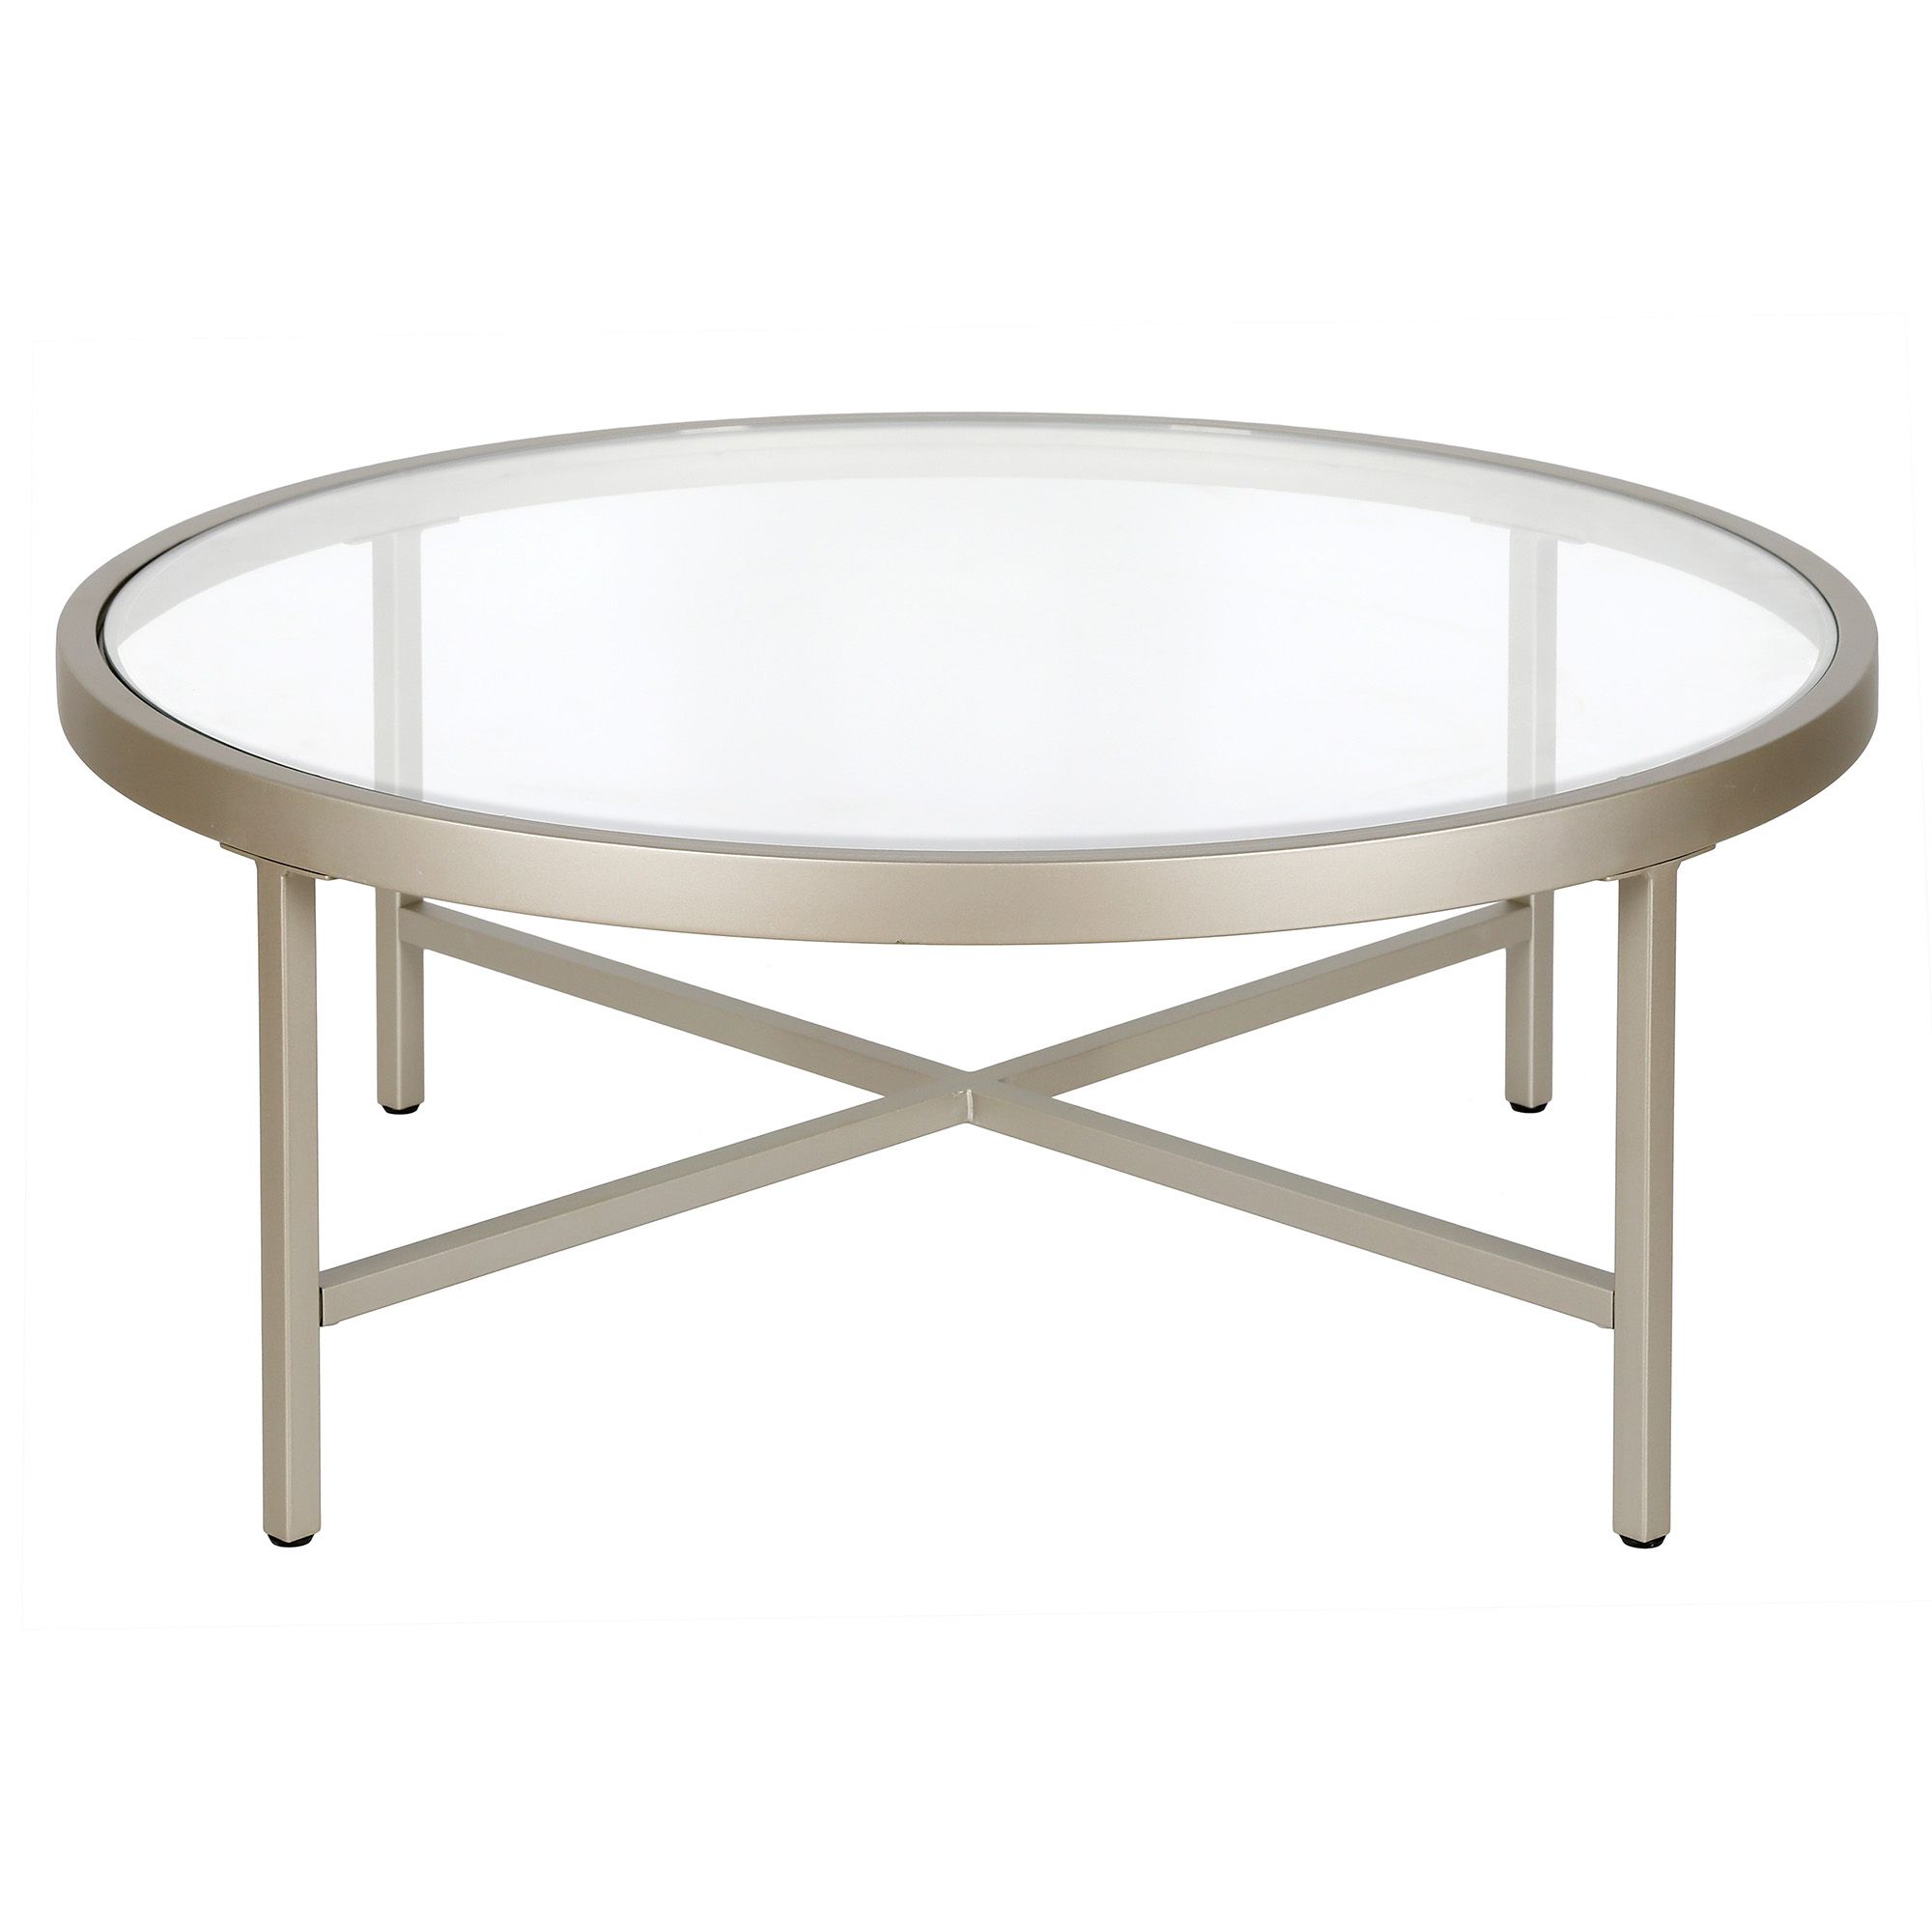 Popular Geometric Glass Modern Coffee Tables Inside Evelyn&zoe Contemporary Round Coffee Table With Glass Top – Walmart (View 4 of 10)